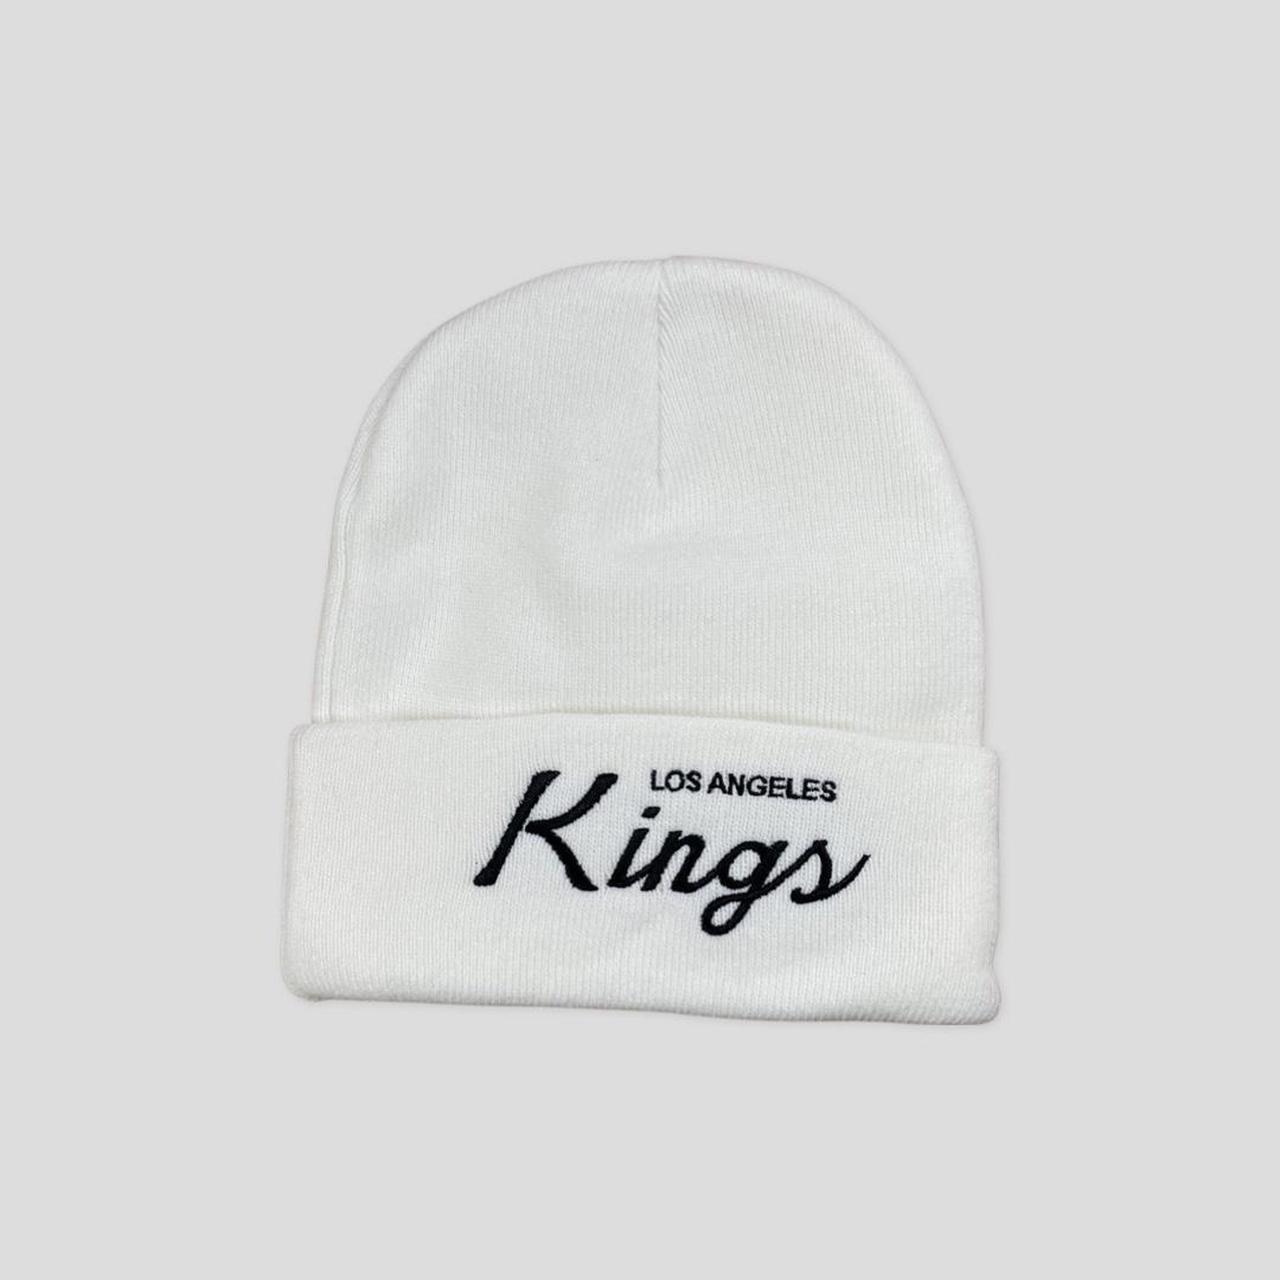 Product Image 4 - Mitchell and ness kings white